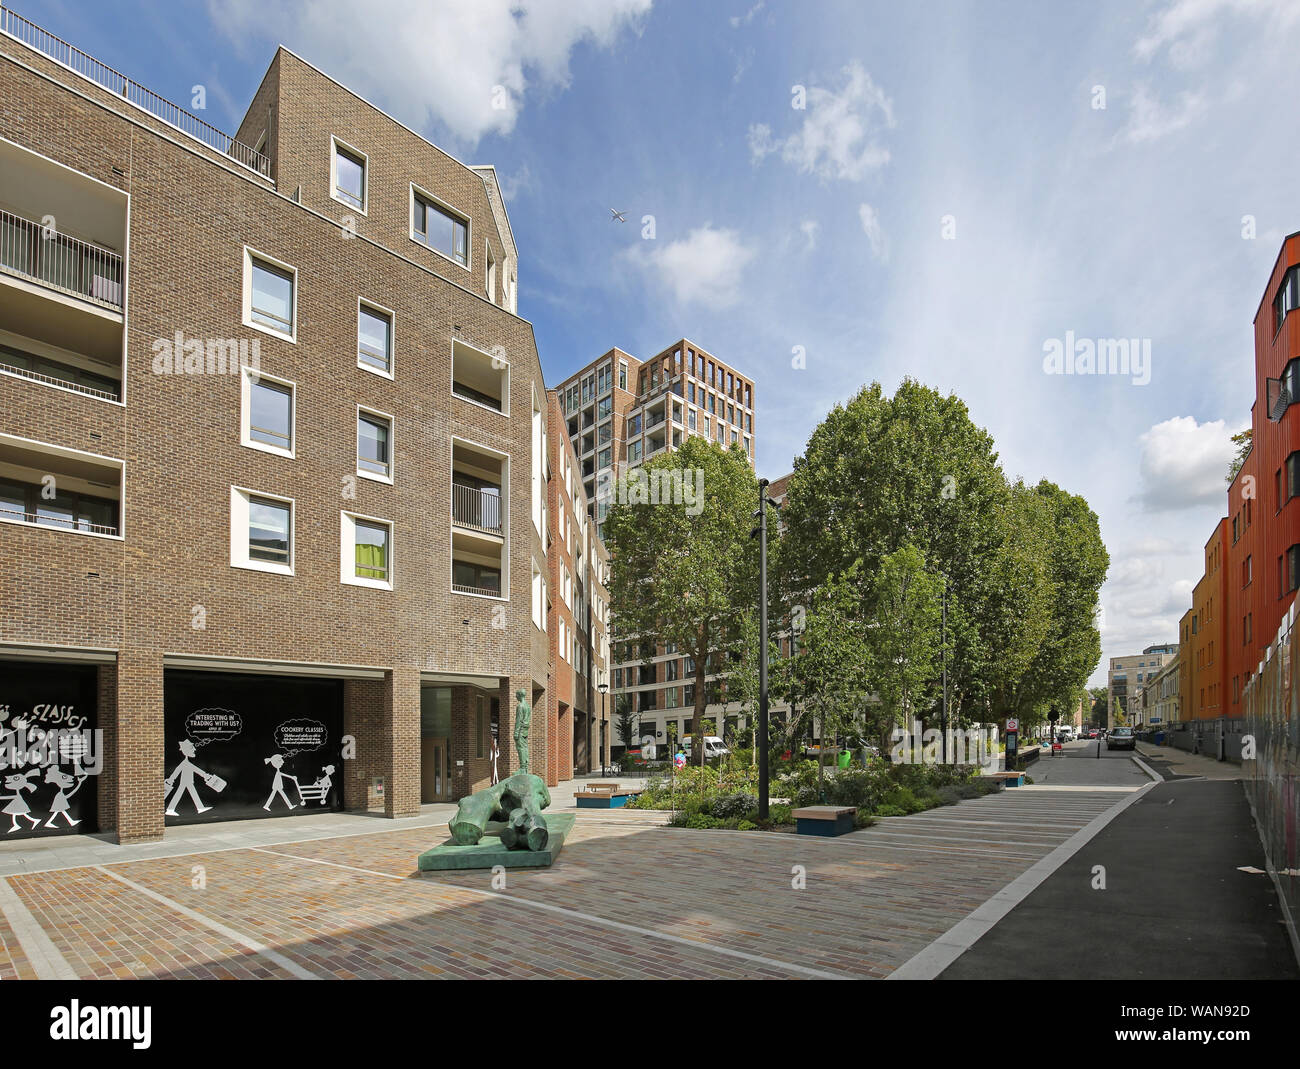 New housing on Wansey Street, London UK. Part of Elephant Park - the huge redevelopment project in the formerly run-down Elephant and Castle area. Stock Photo